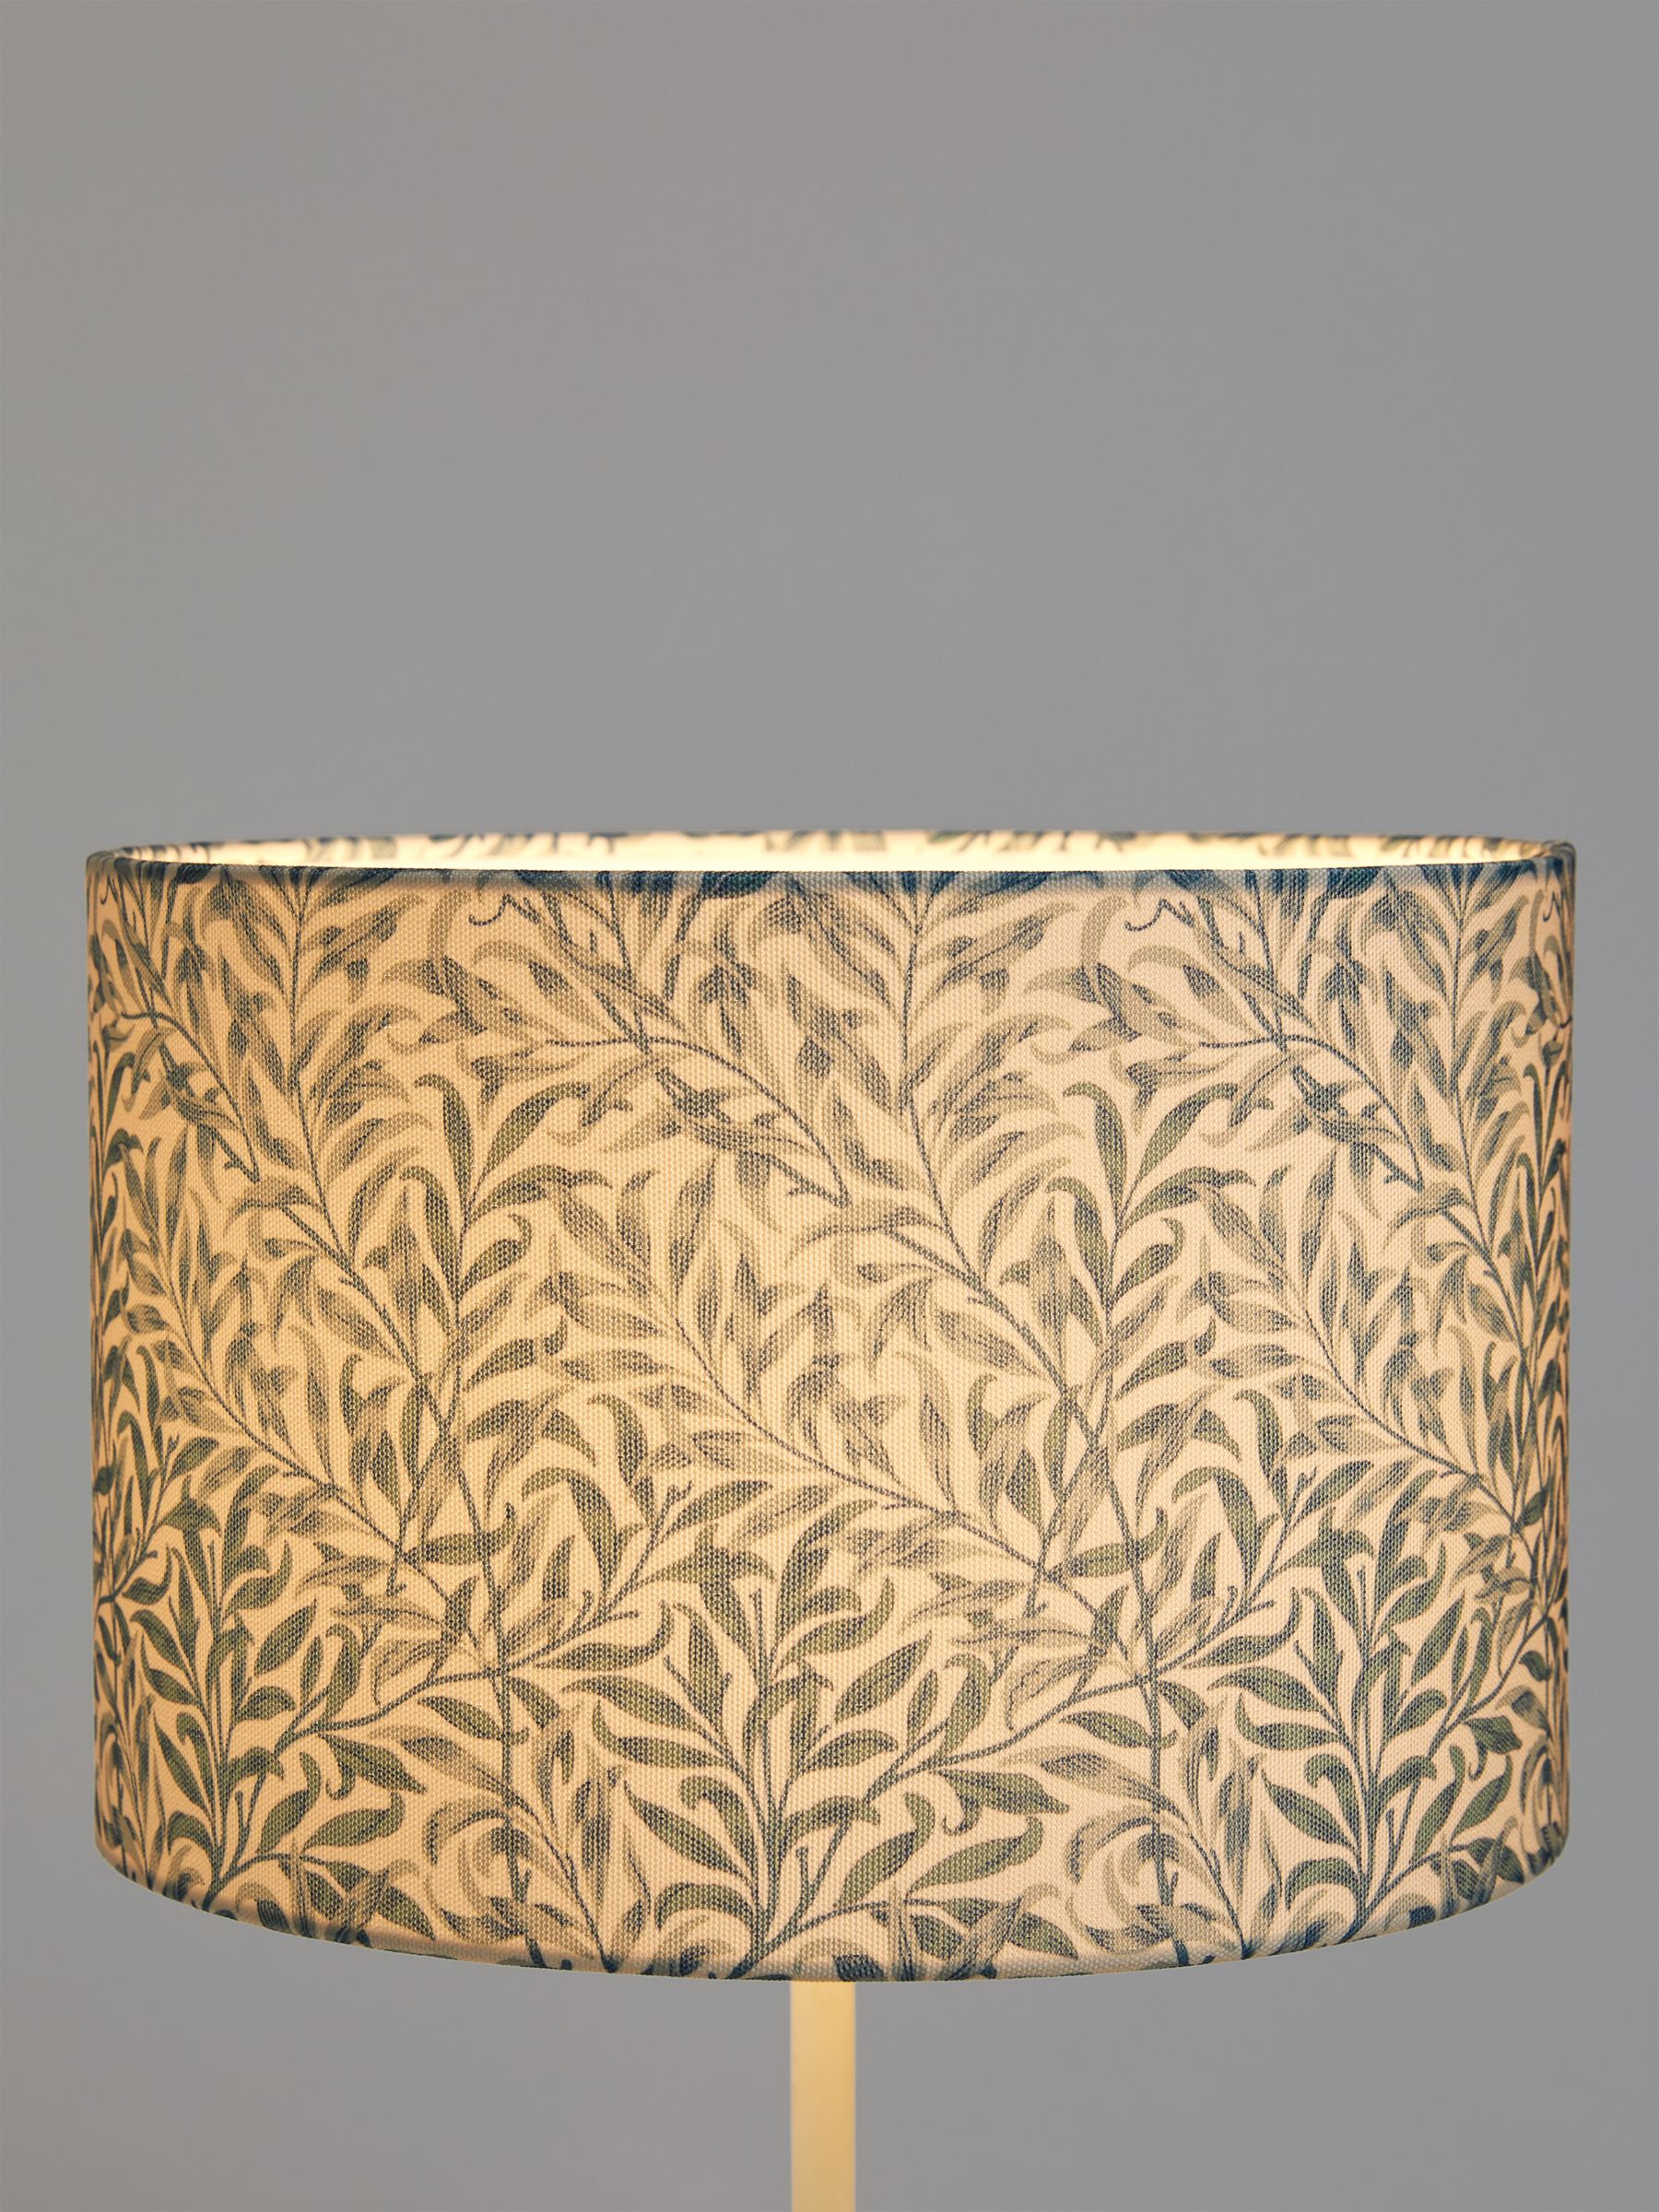 Photo of Morris & co. willow bough lampshade multi